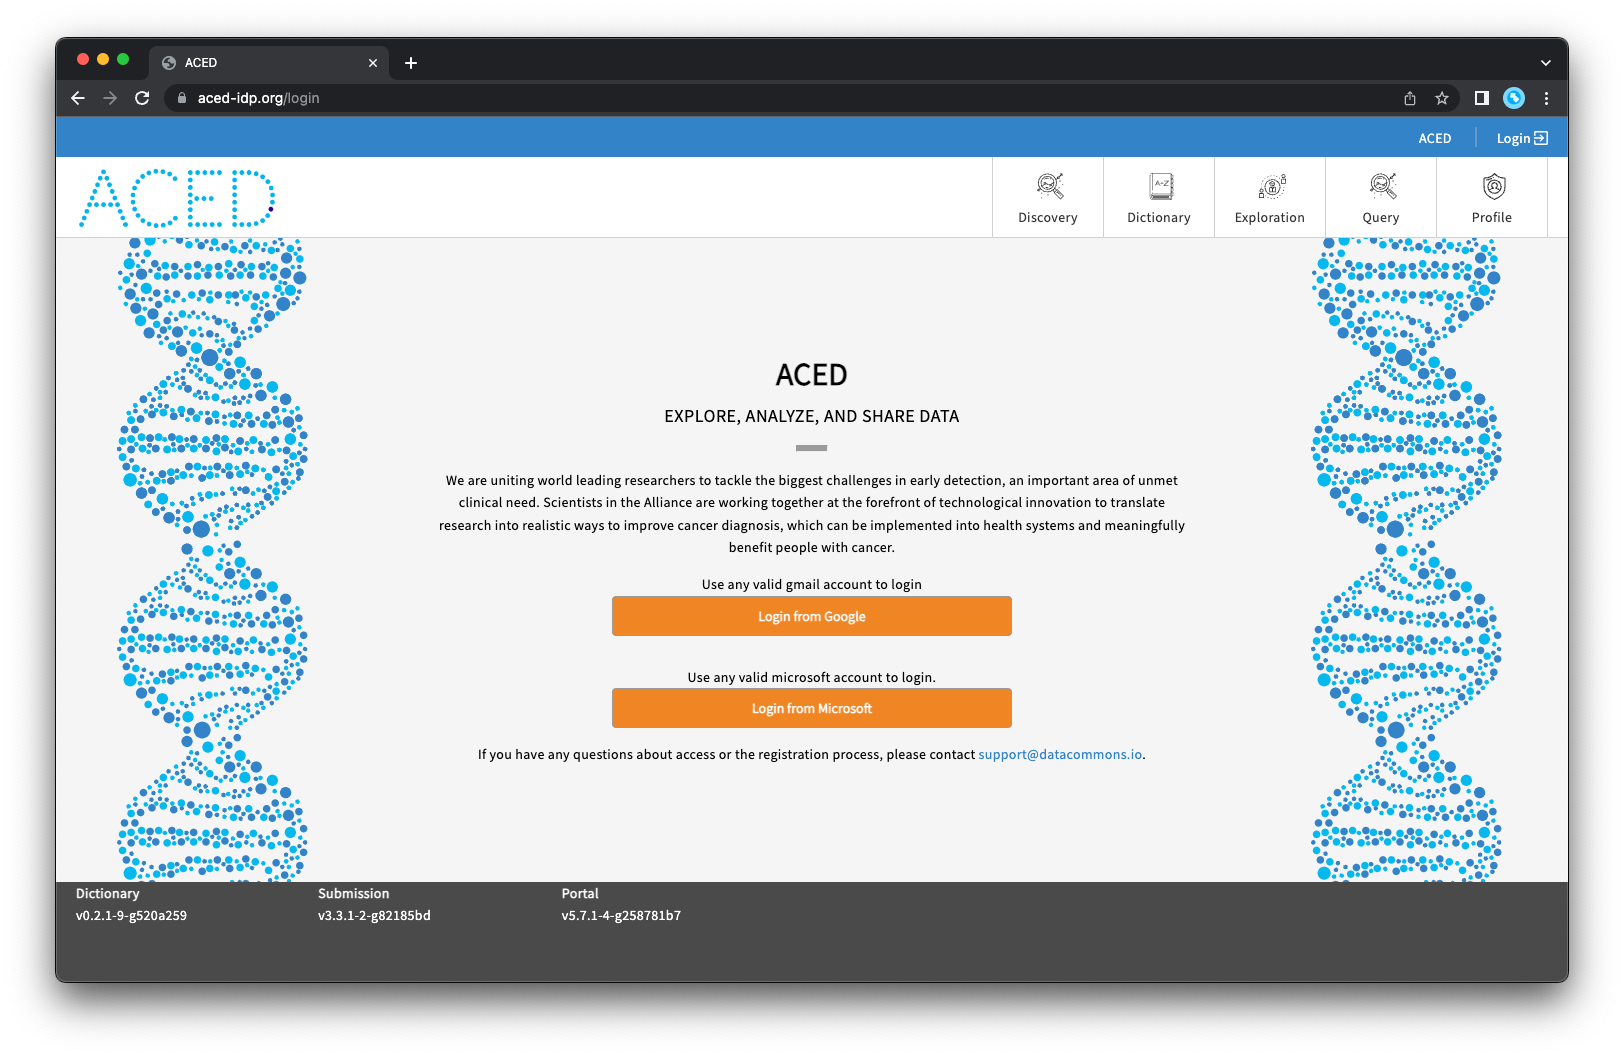 Main landing page for ACED IDP